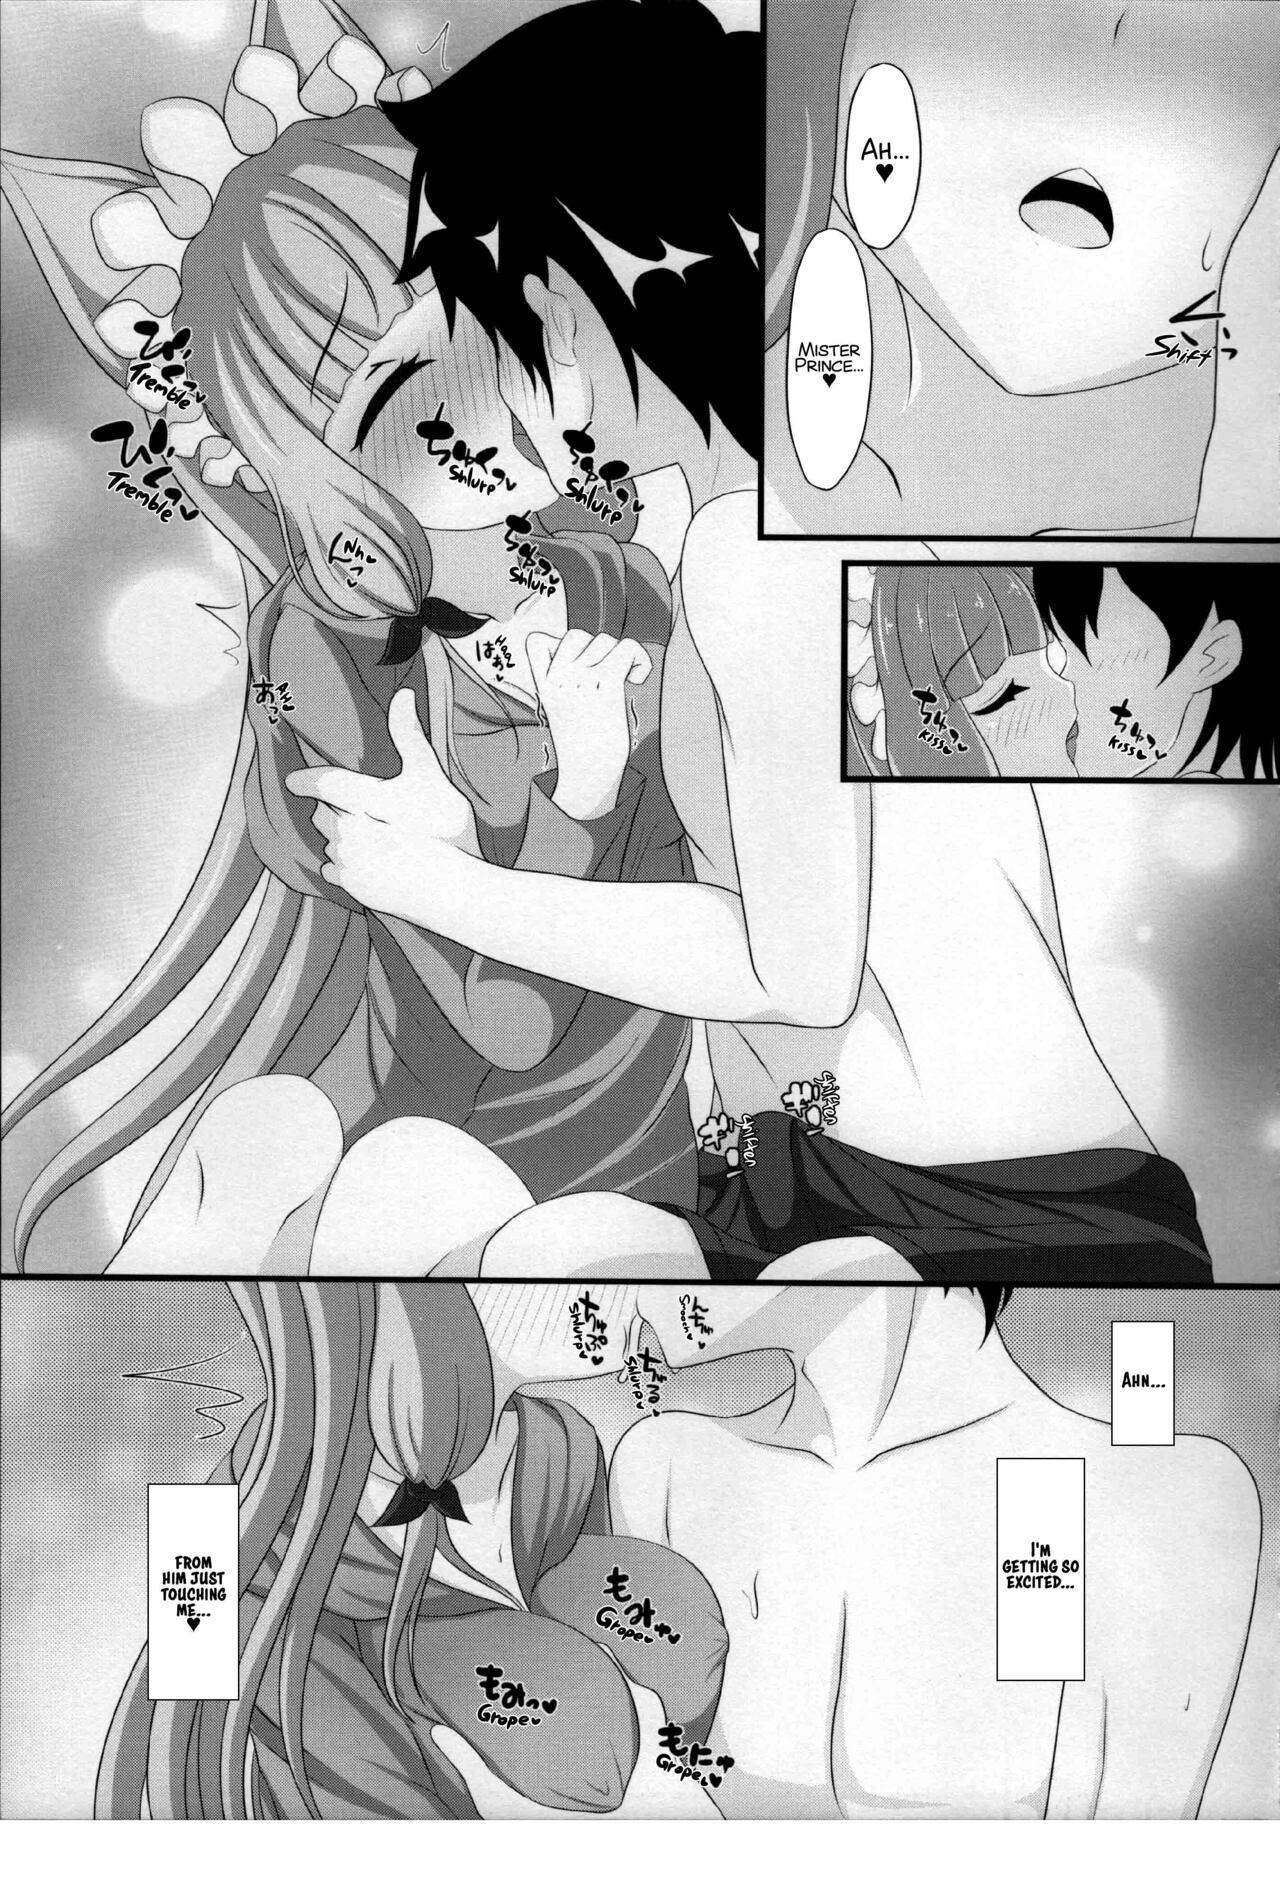 Nude Maho Hime Connect! 2 - Princess connect 1080p - Page 8